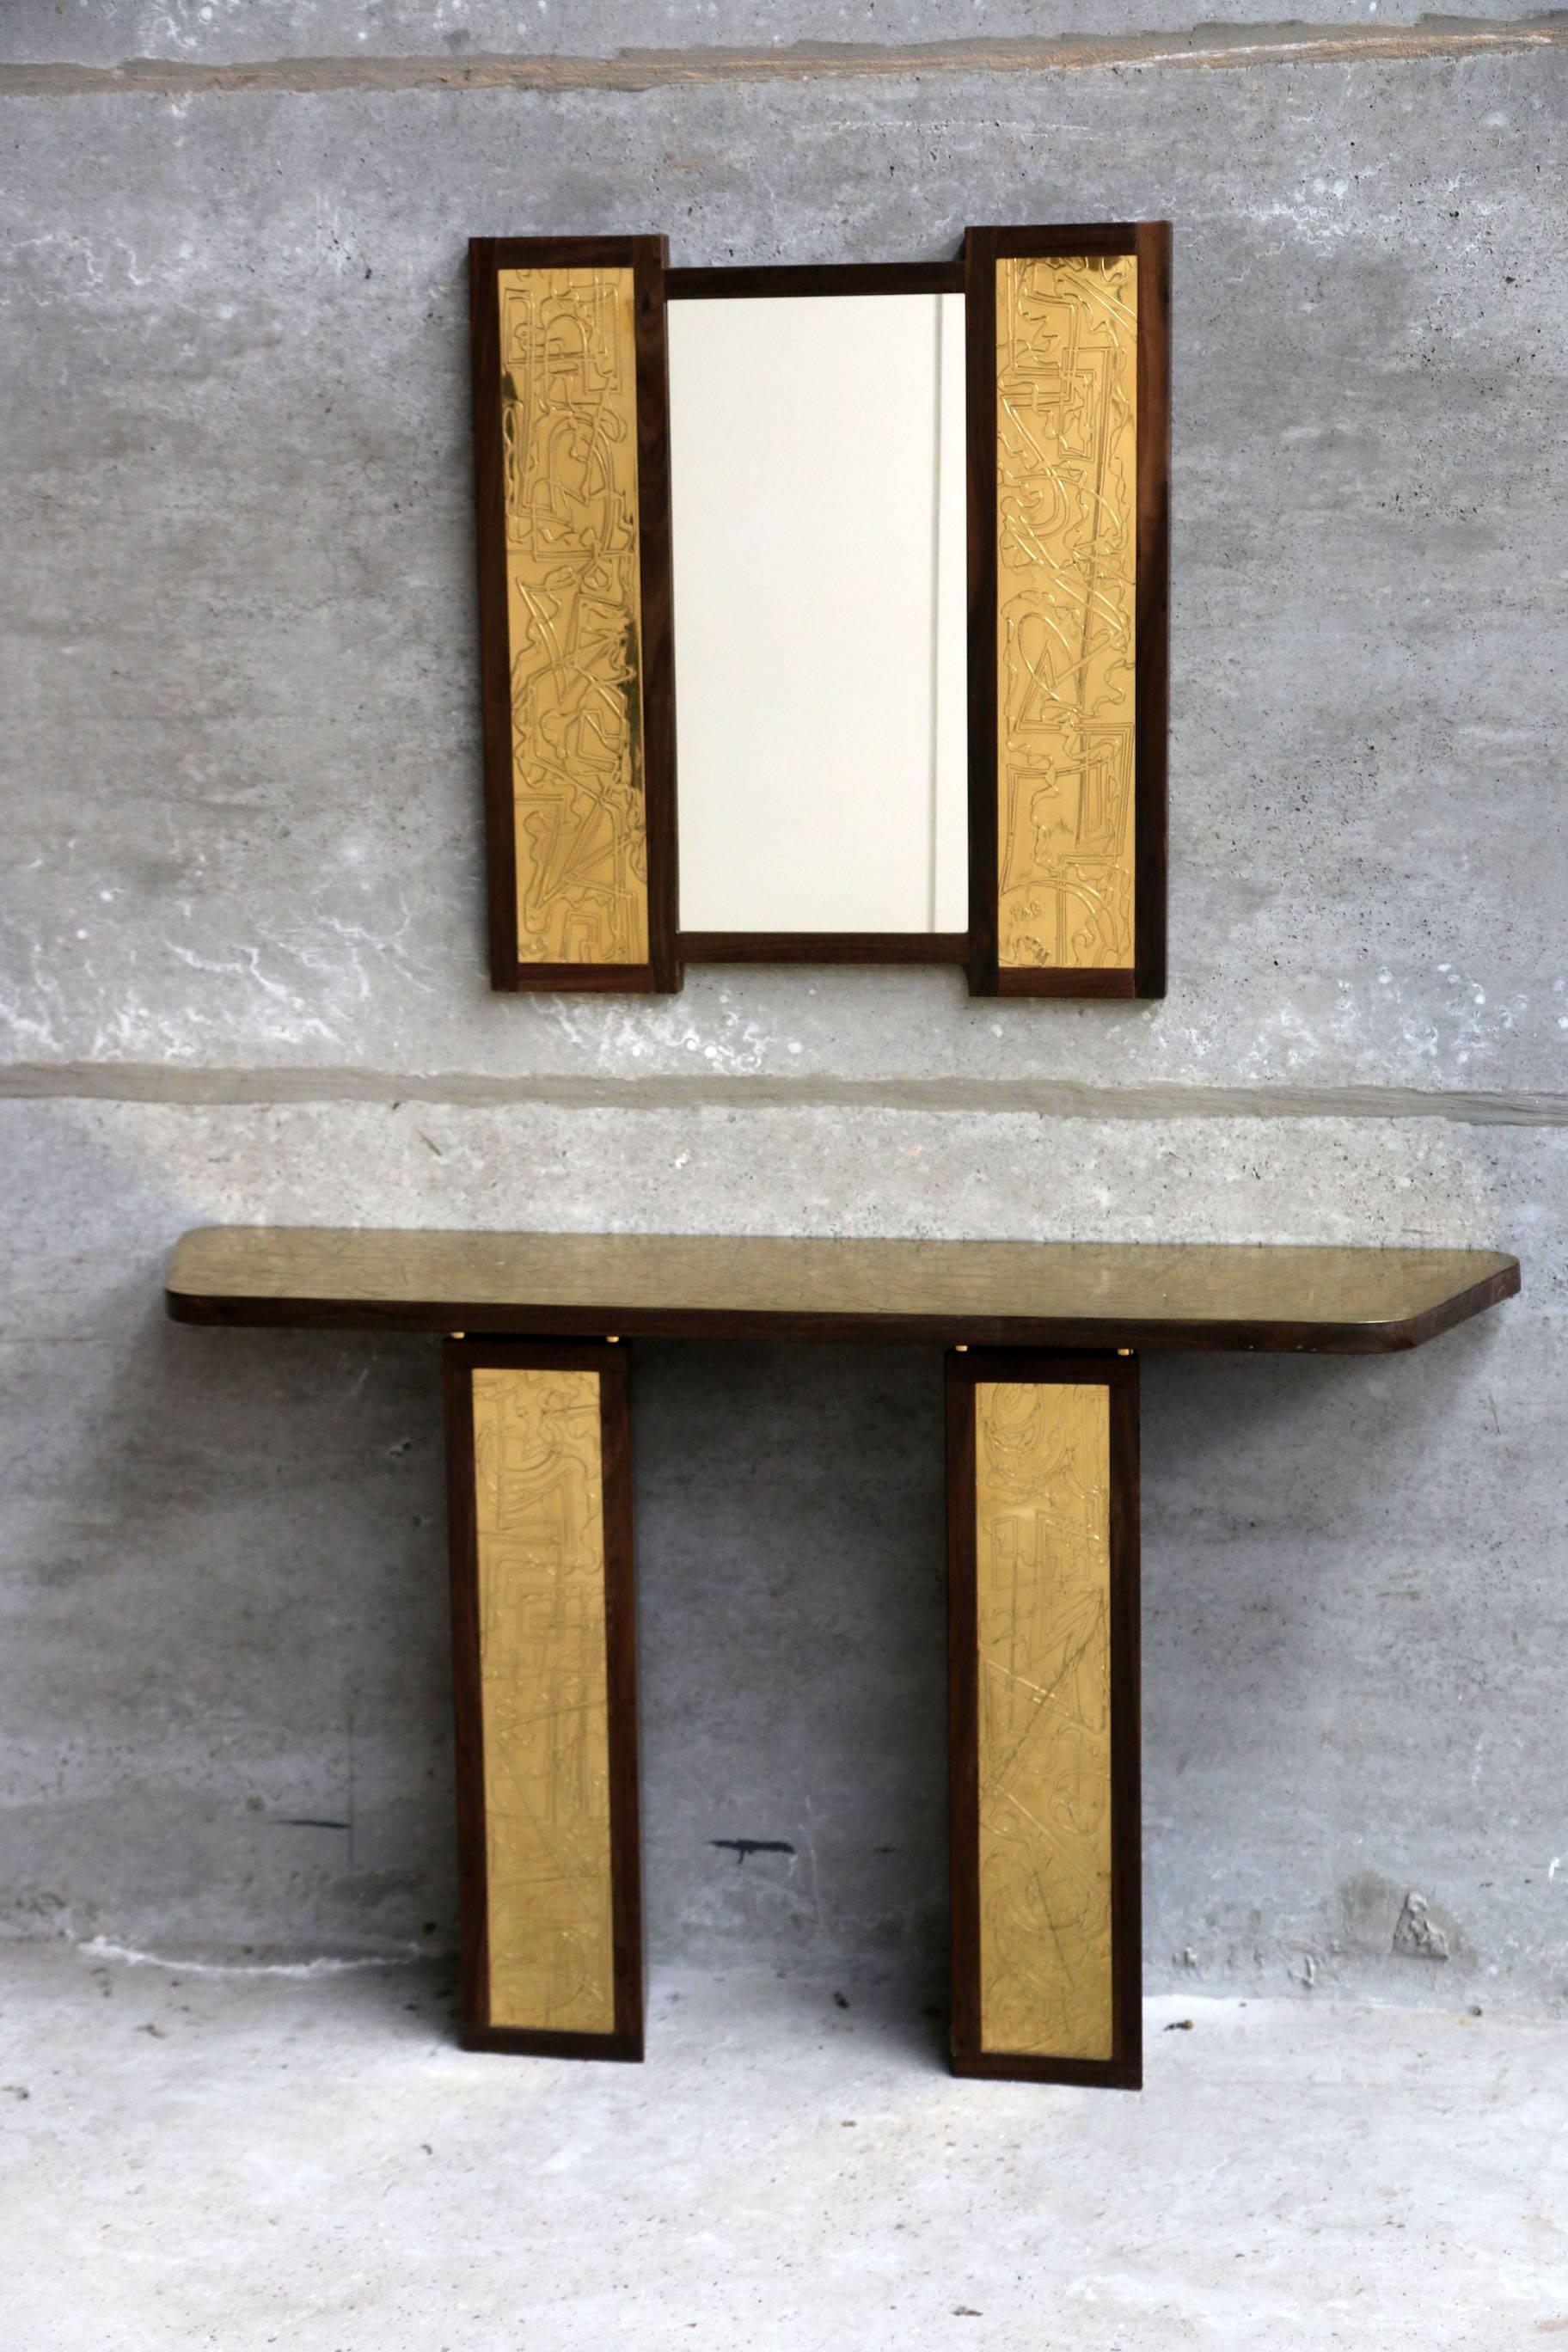 Mirror and console by Studio Belgali, handmade acid etched brass, one of a kind.